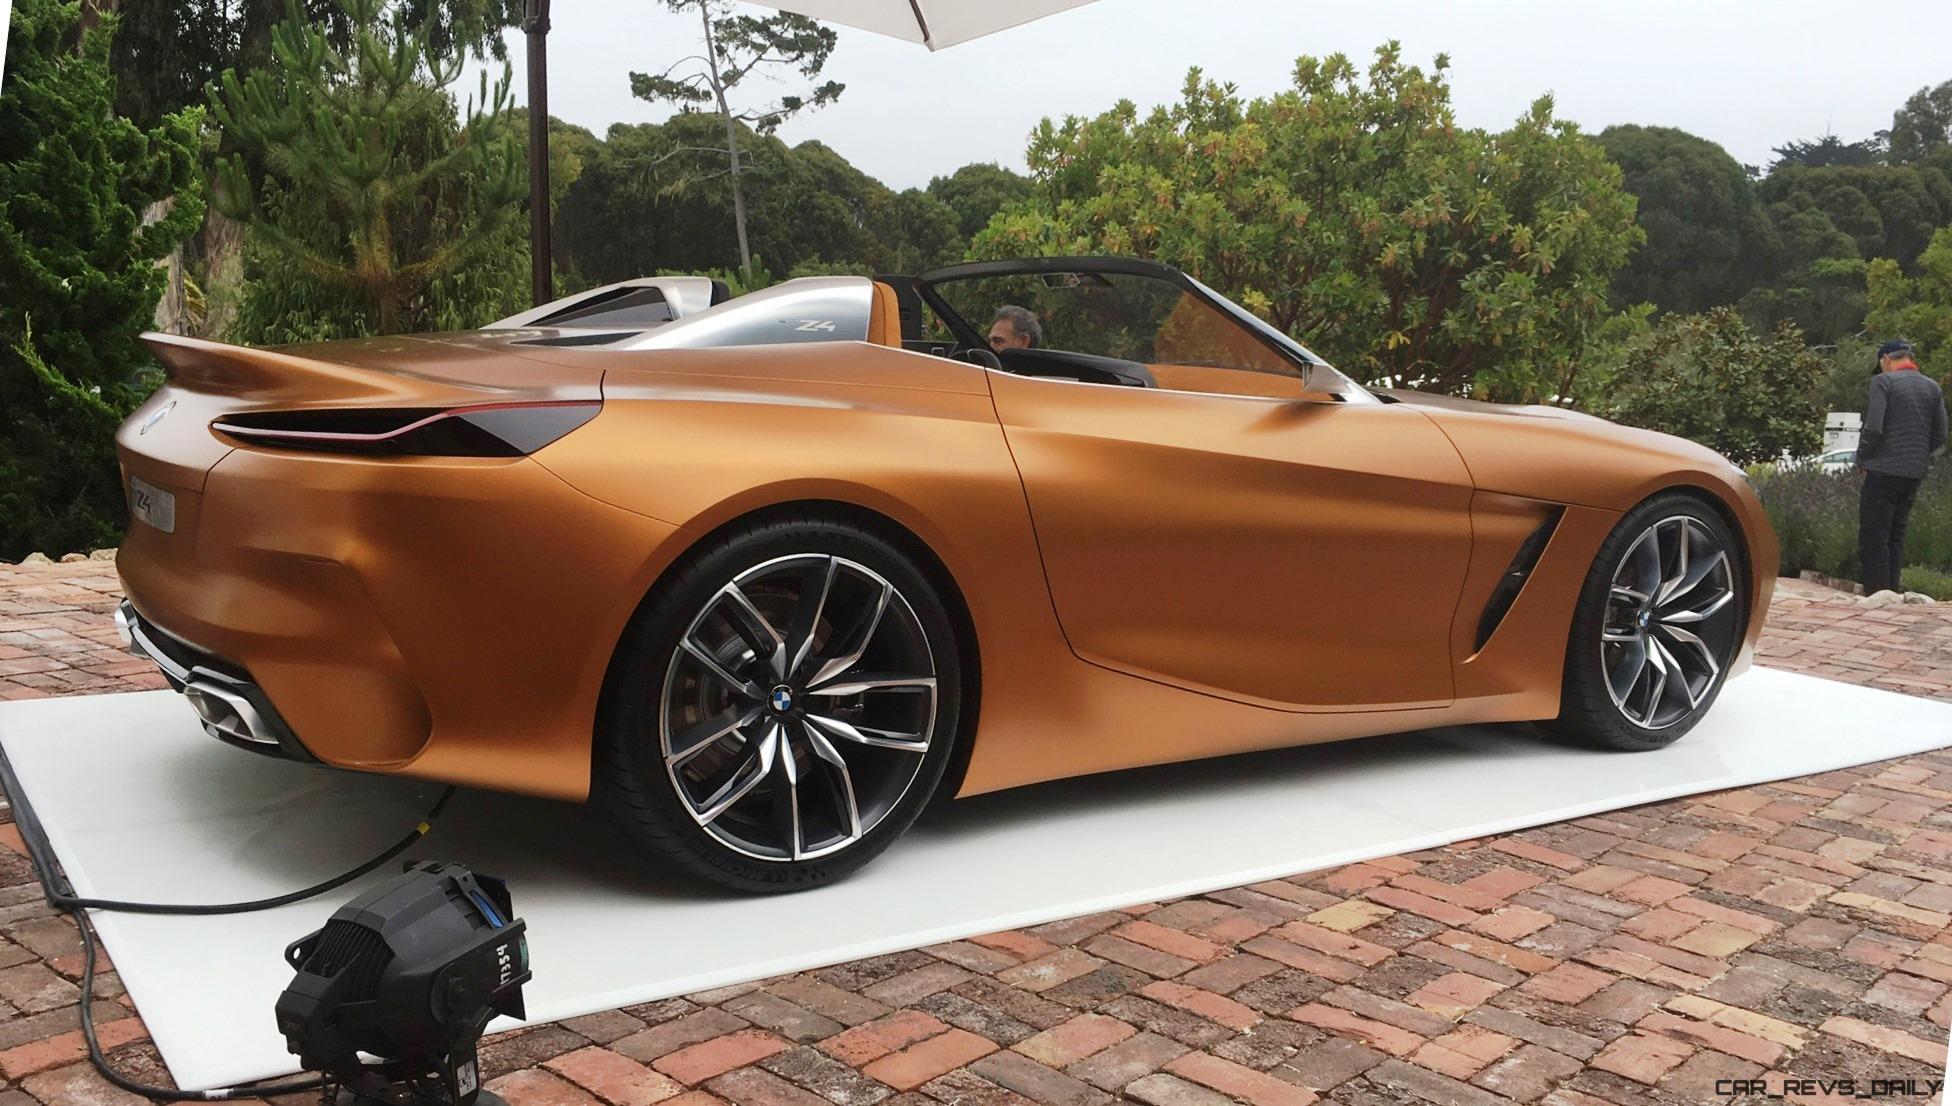 The Future Of Luxury: The 2017 BMW Z4 Concept